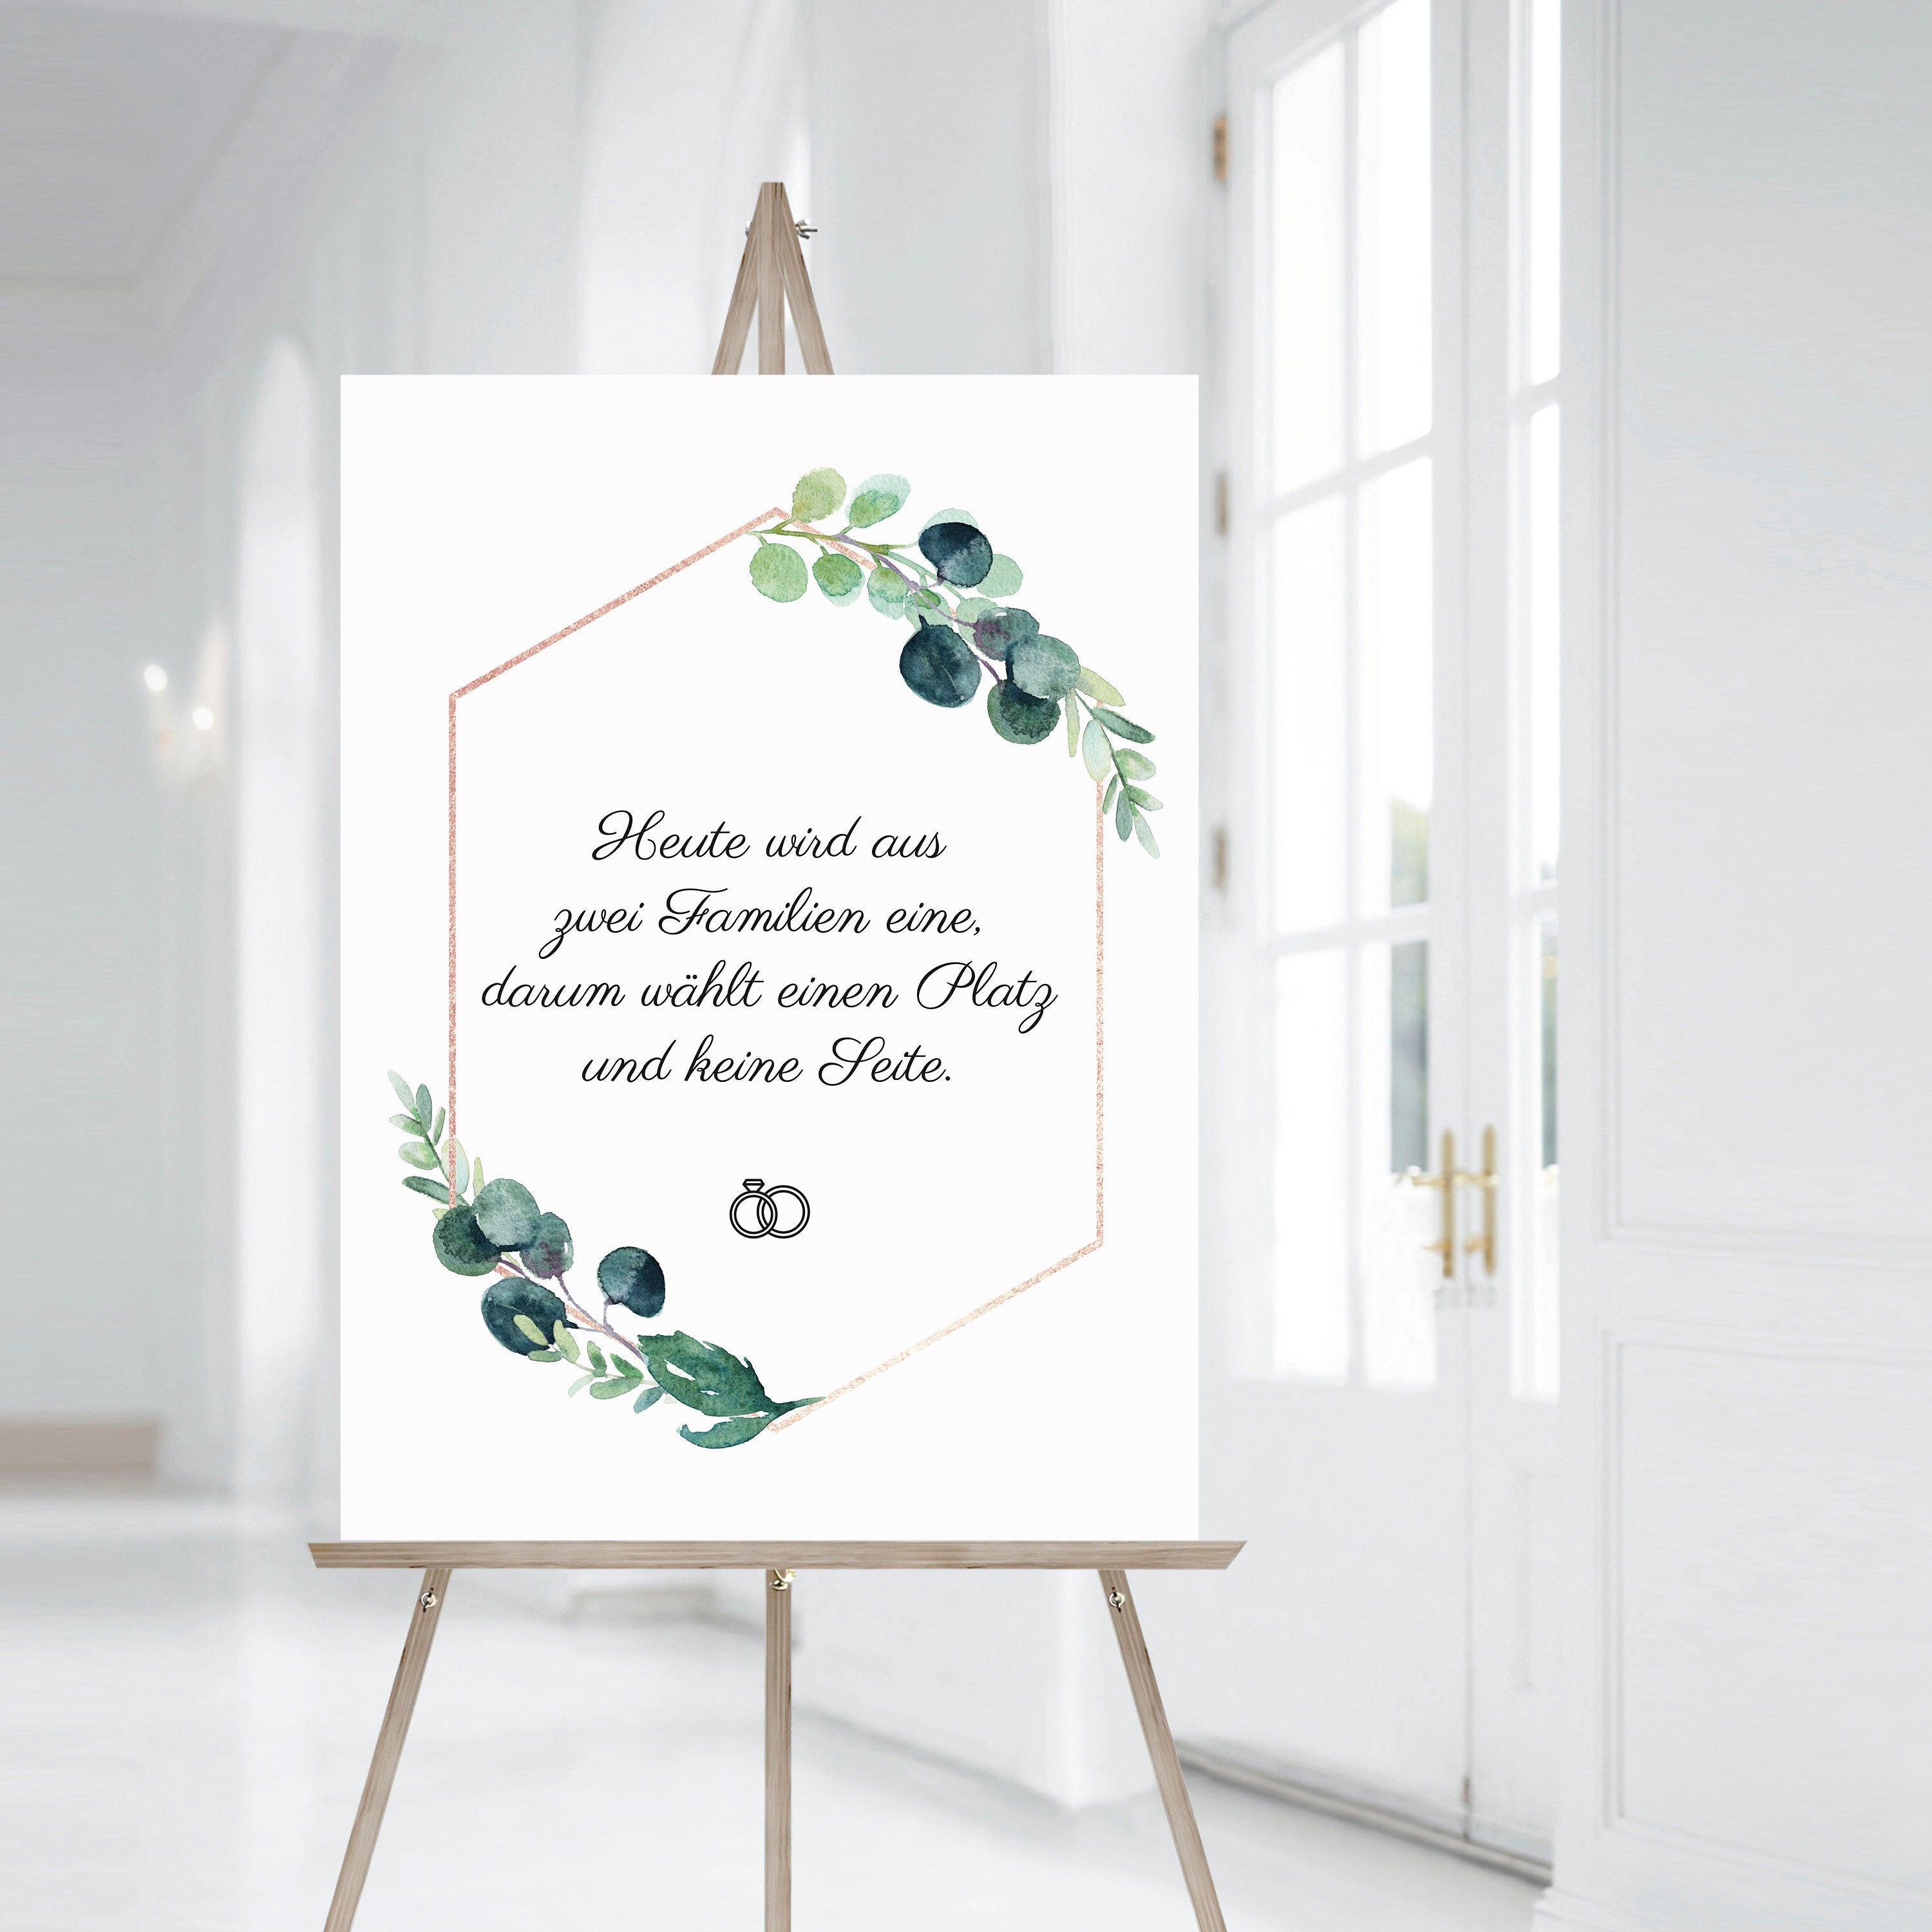 Choose A Seat Not A Side Sign, 24 Sizes, Wedding Welcome Sign, Pick A Seat  Not A Side Sign, Wedding Ceremony Sign the One INSTANT DOWNLOAD 